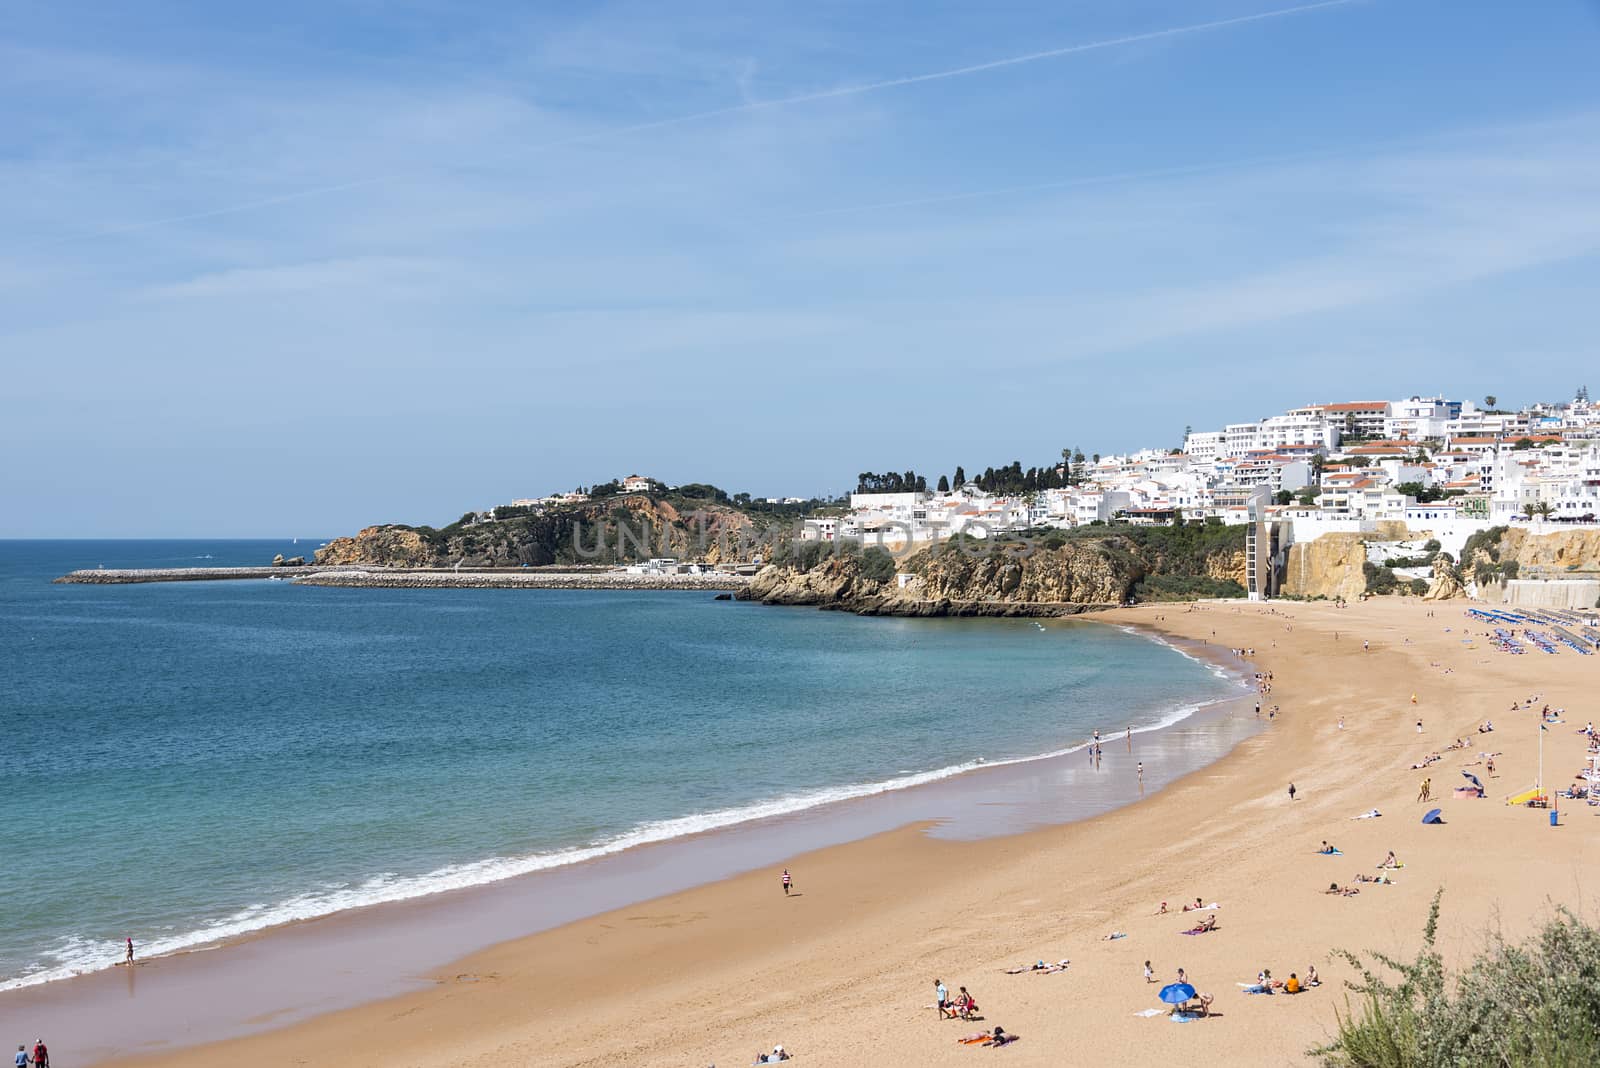 ALBUFEIRA, PORTUGAL - APRIL 23: View of crowded Falesia beach at the midday in the summer mediterranean resort Albufeira on April 23, 2015. This town is a part of famous tourist region Algarve.